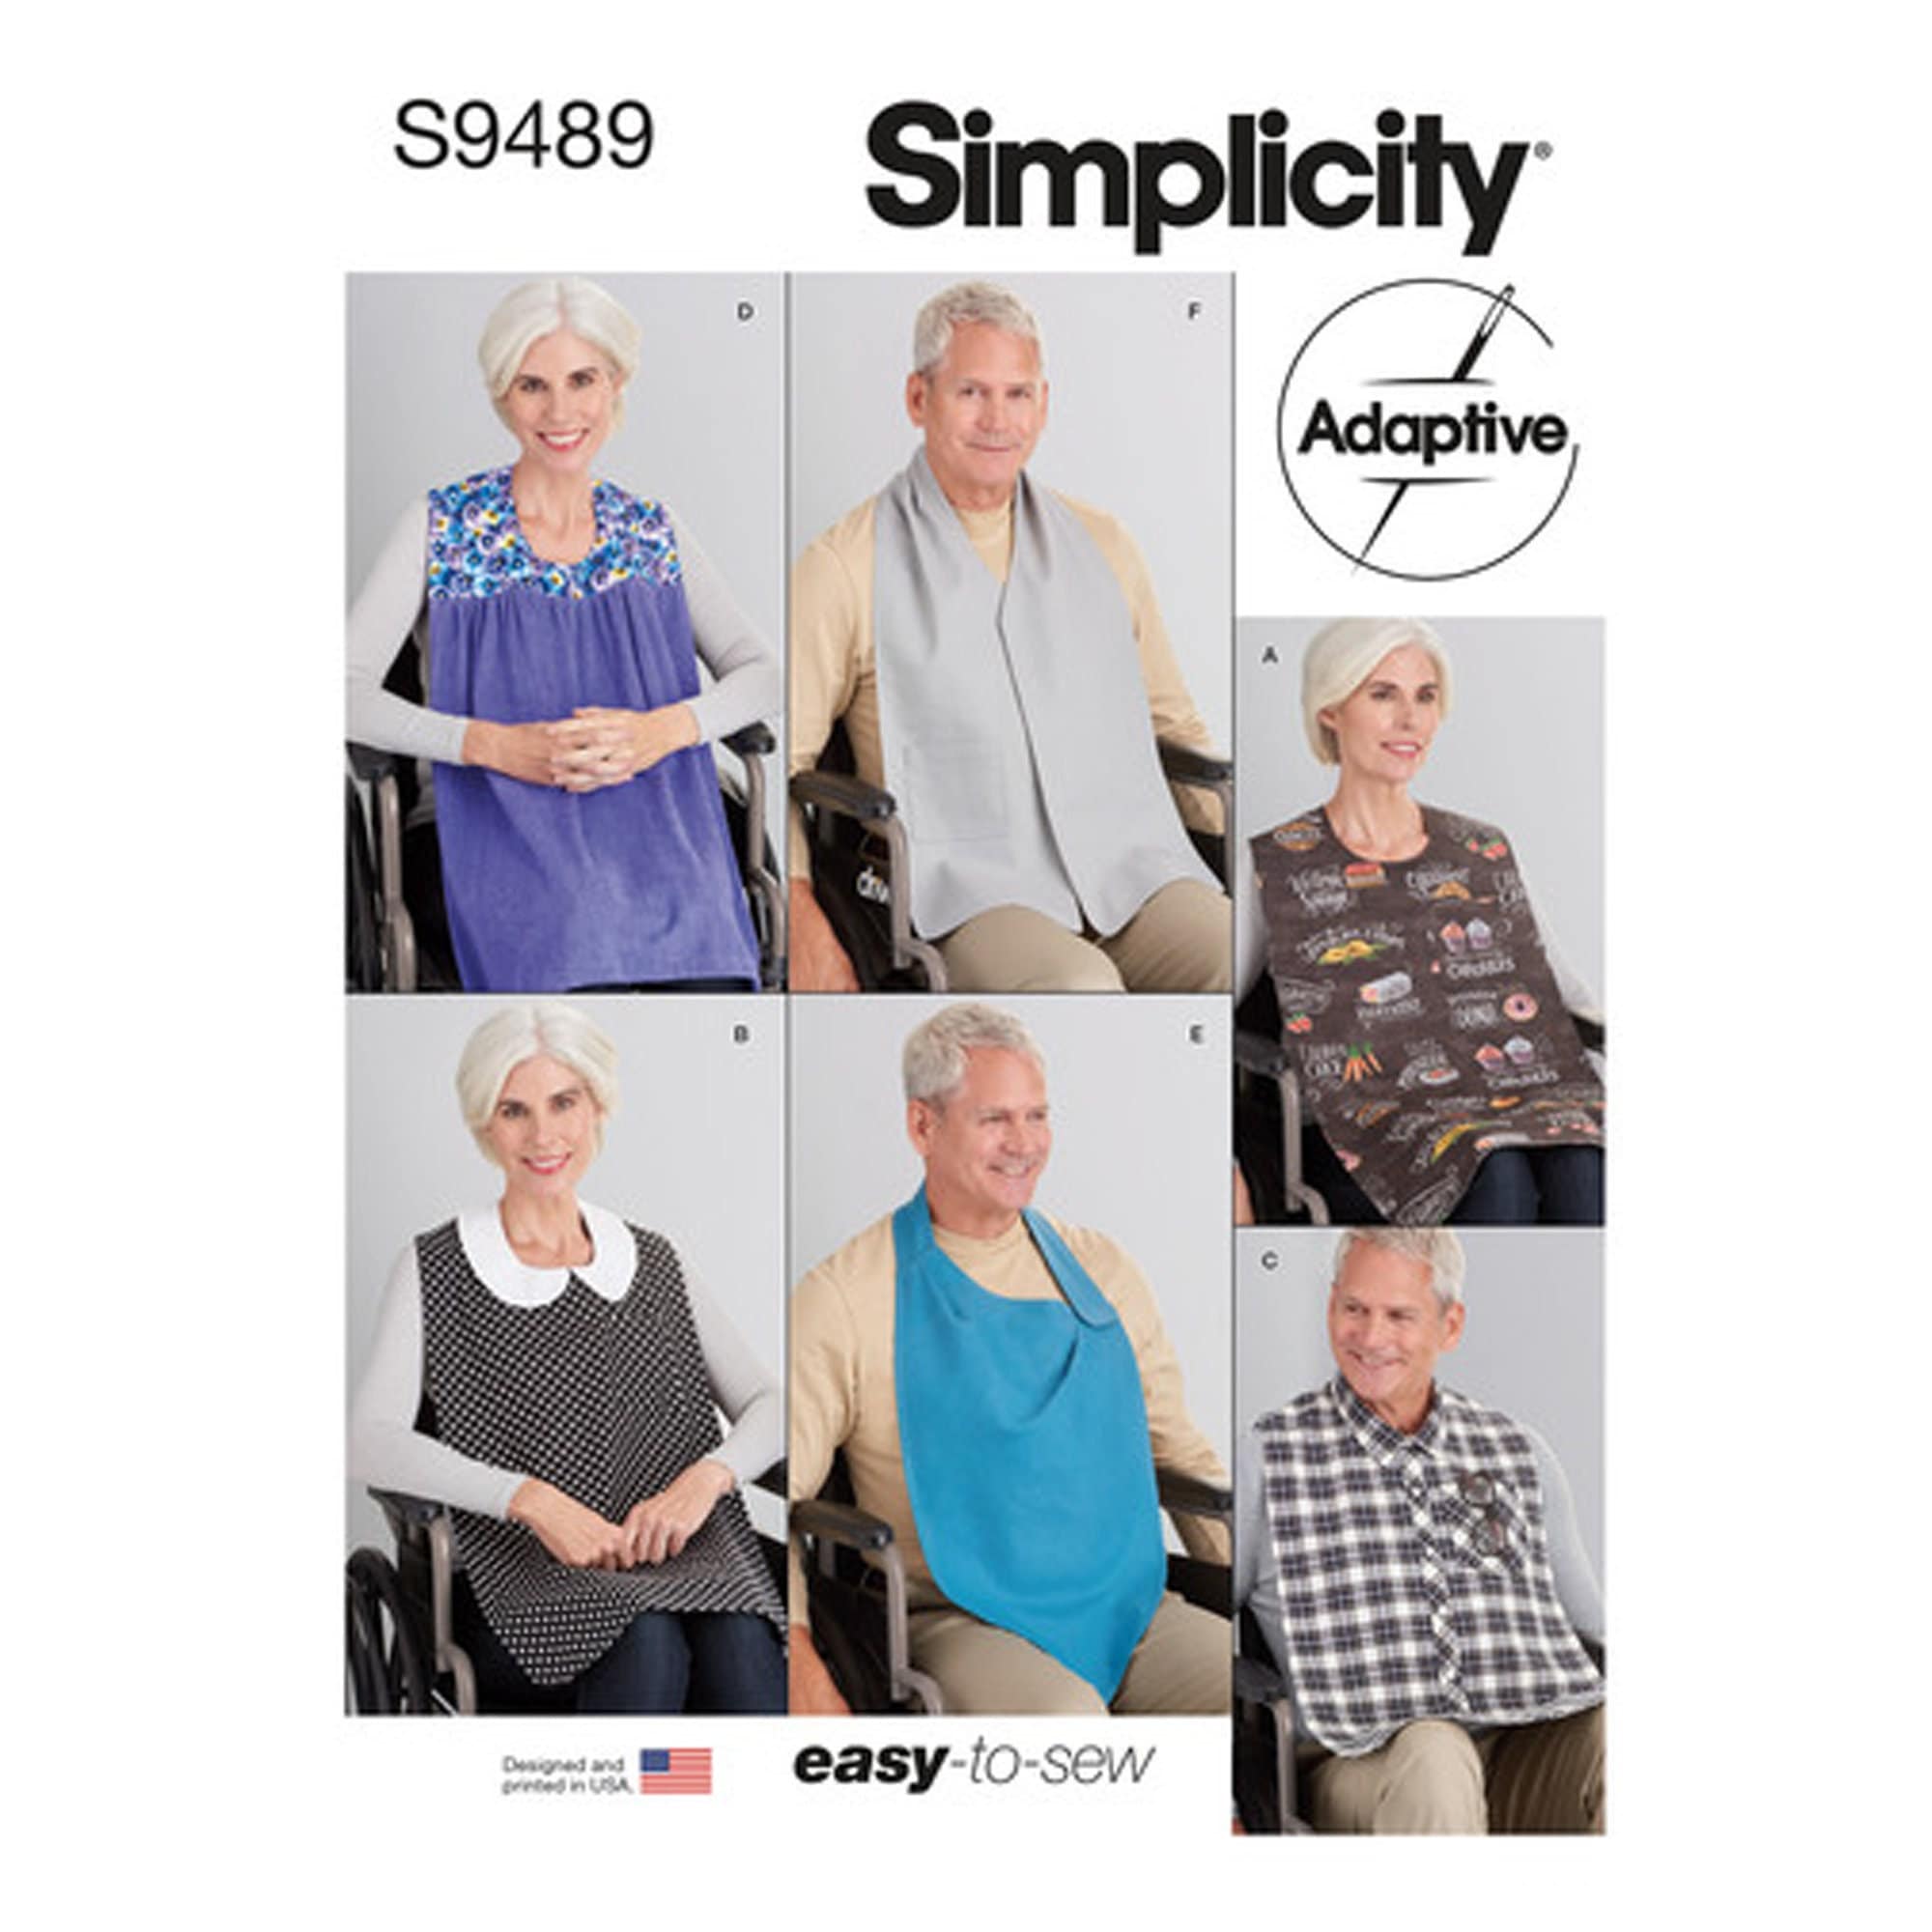 Simplicity 9489 Very Easy Sewing Pattern for Men and Womens Clothing  Protectors, Adaptive Adult Bibs One Size NEW UNCUT F/F 